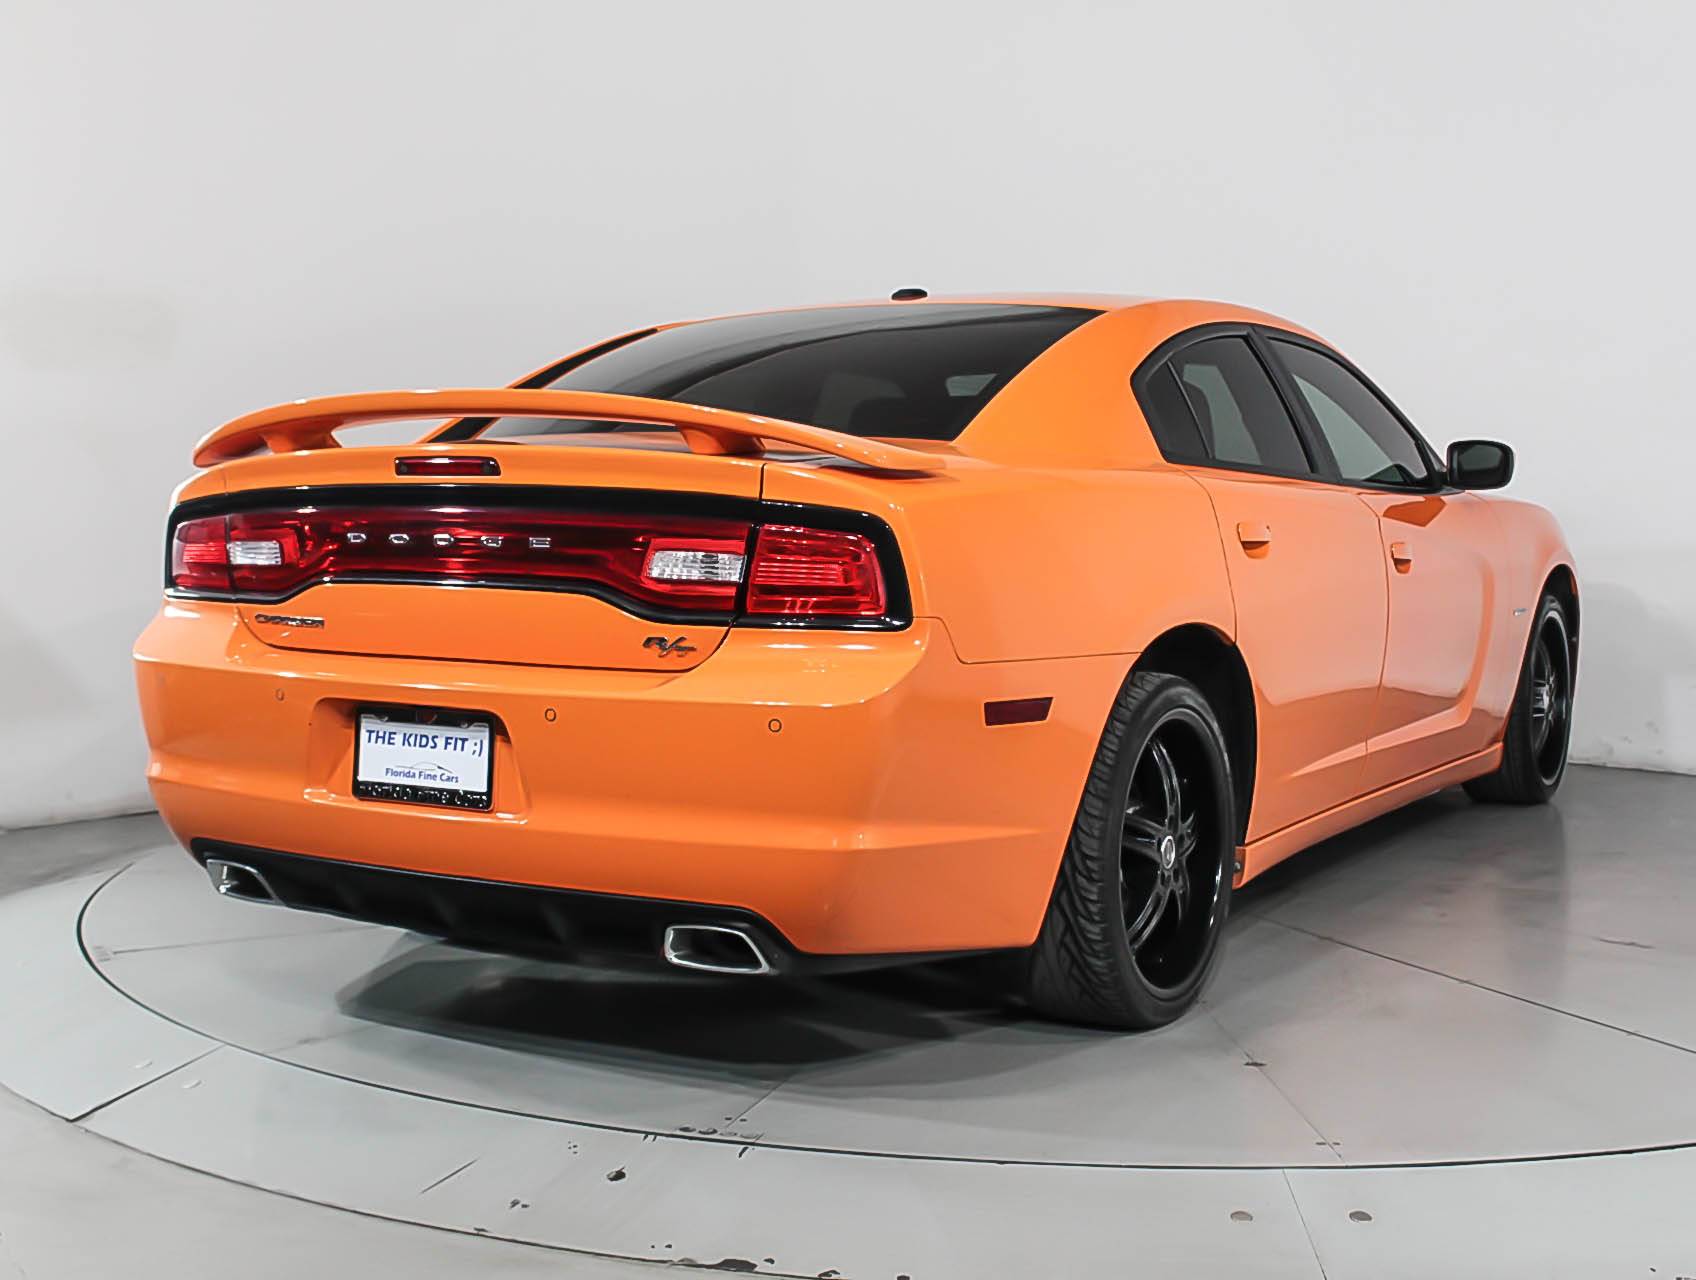 Florida Fine Cars - Used DODGE CHARGER 2014 MARGATE R/t